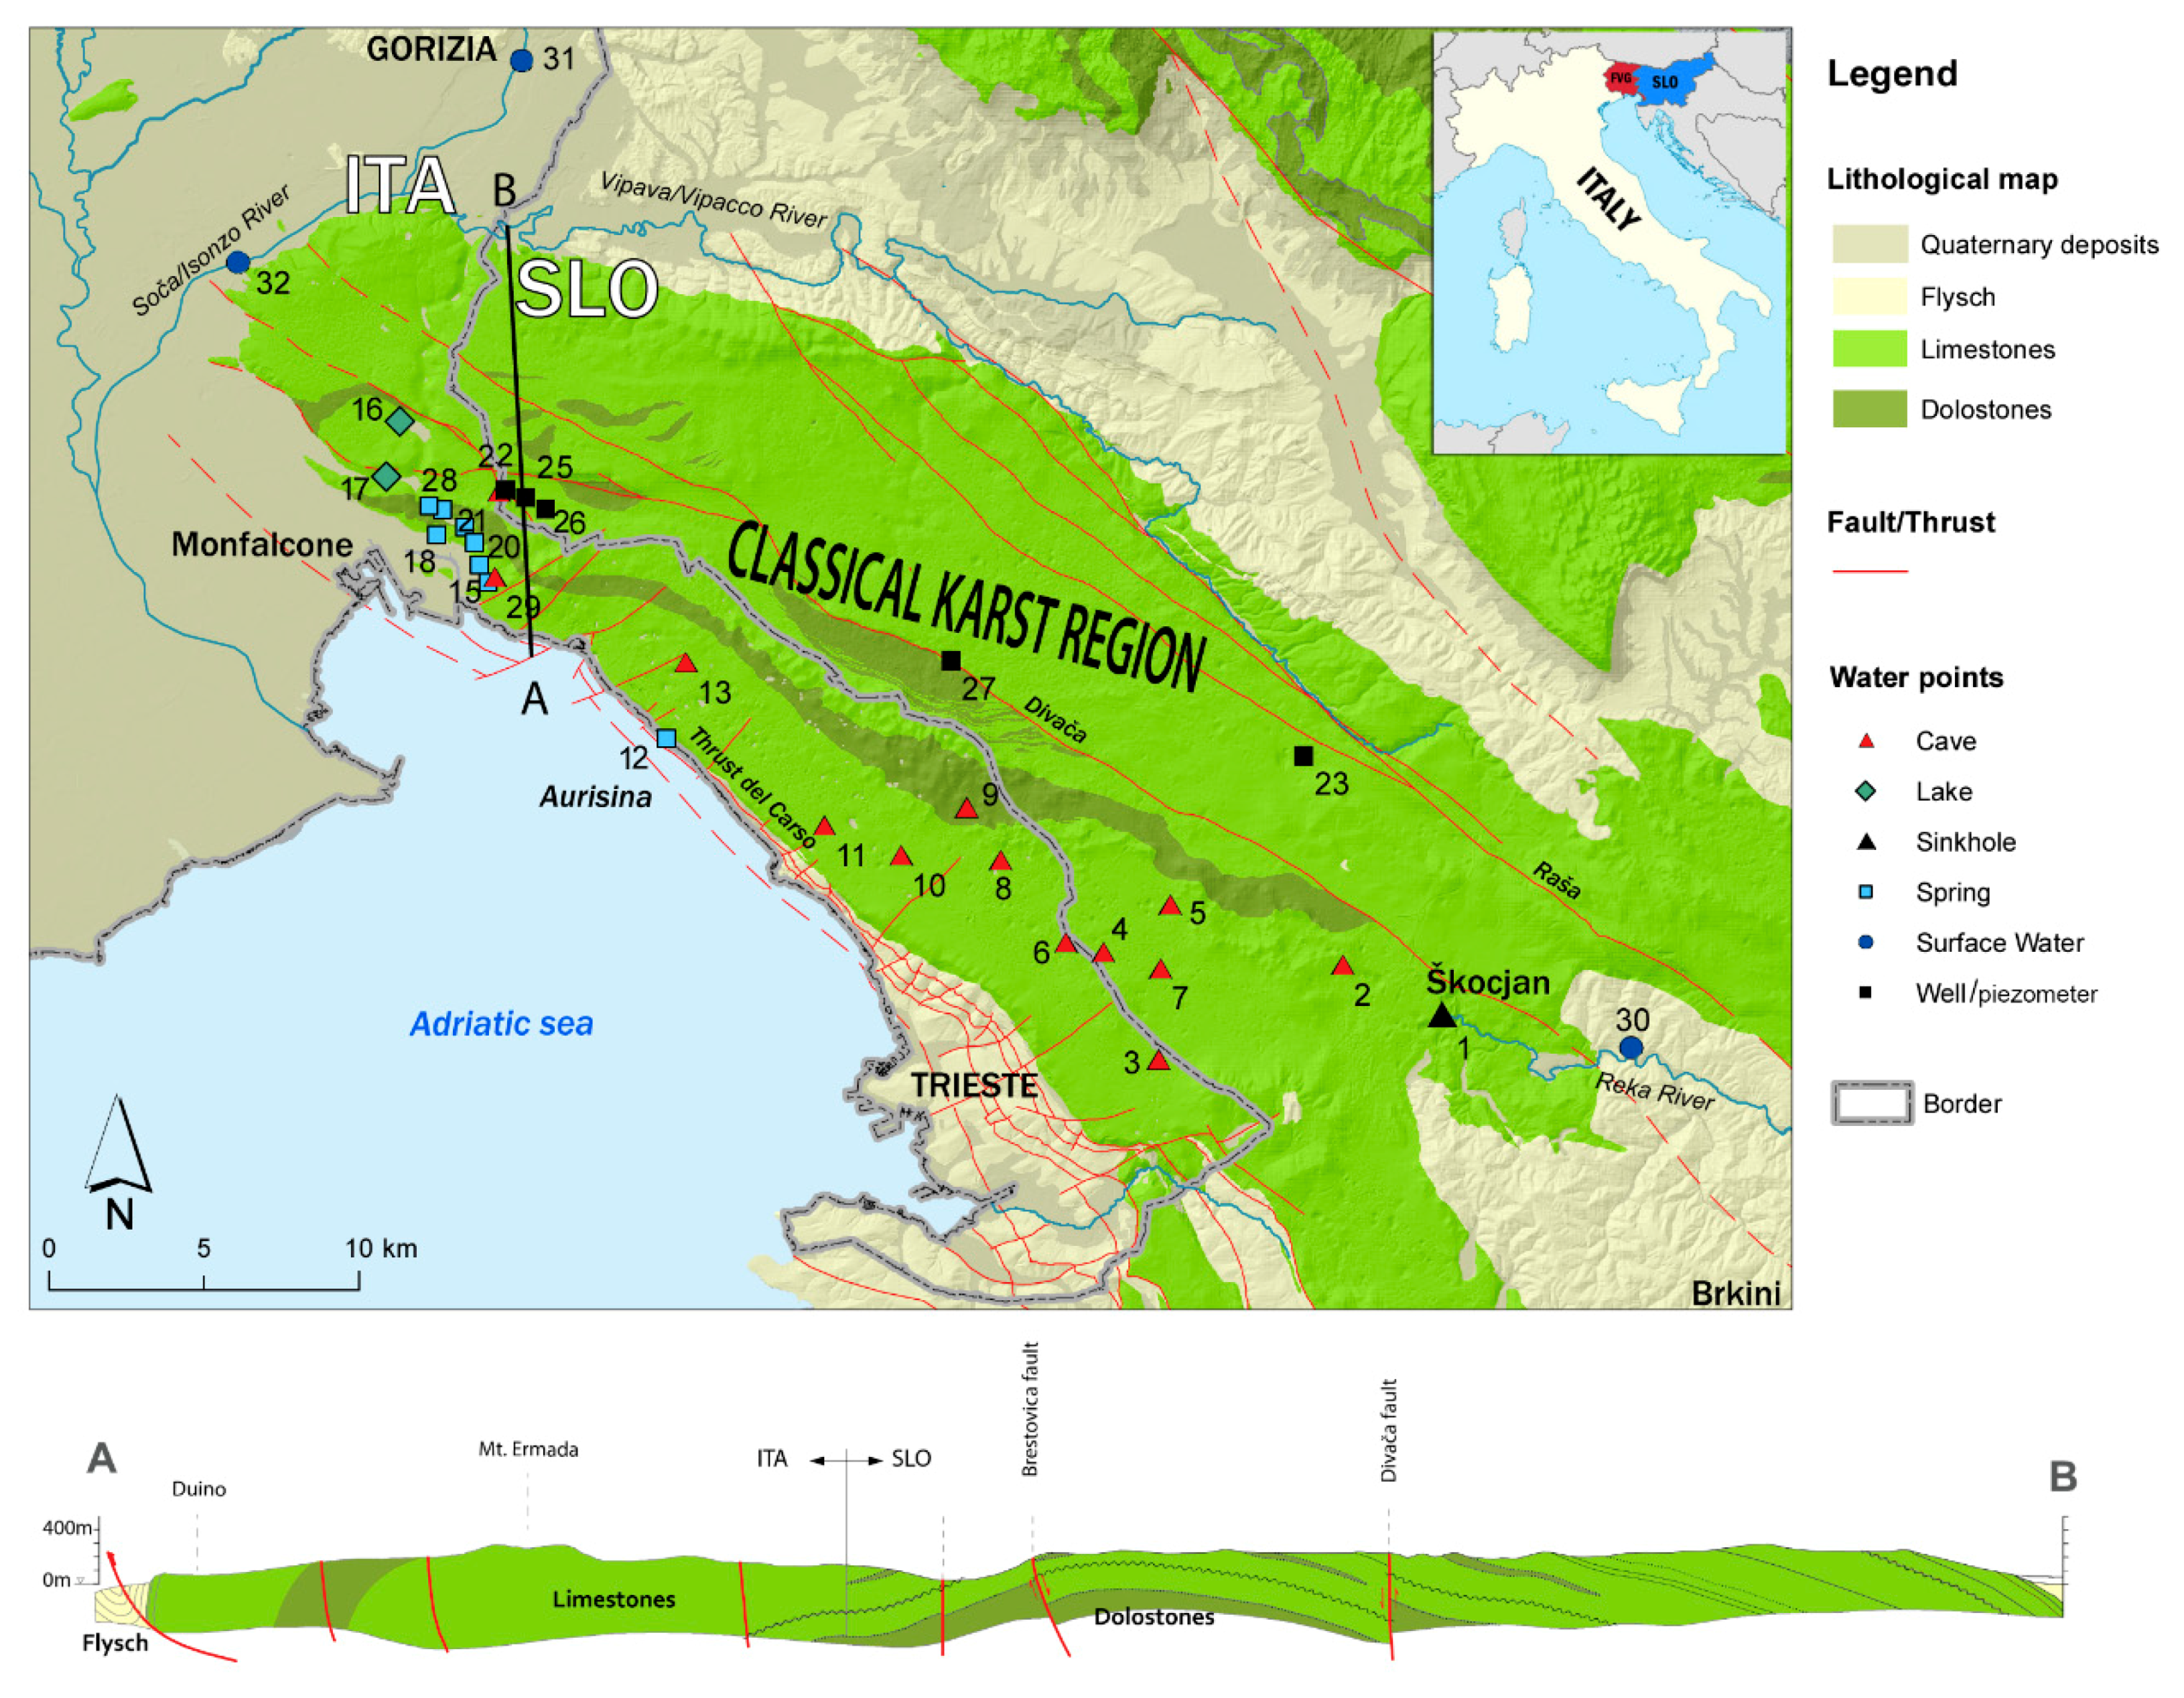 Geosciences | Free Full-Text δ2H) Region (87Sr/86Sr) Characterization Case and Groundwater by of | Aquifer The (δ18O Conservative and Means Karst Isotopic Non-Conservative Classical Values: (Italy–Slovenia)